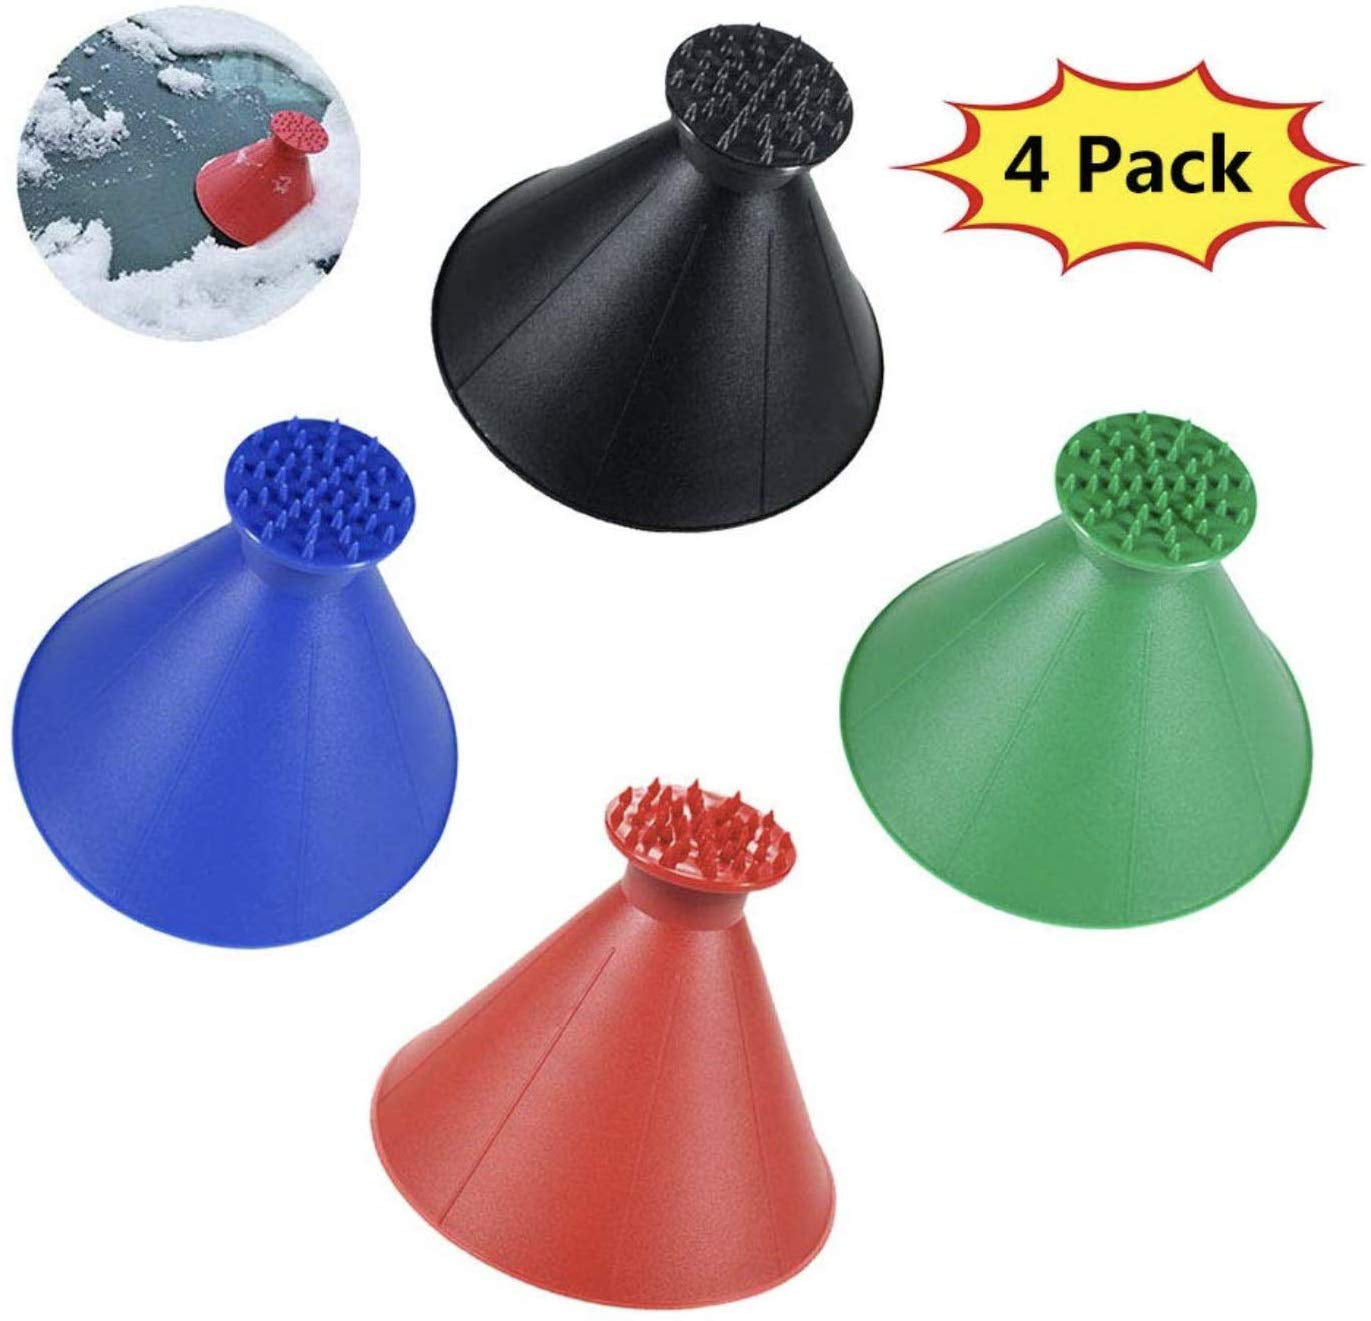 Round Windshield Ice Scraper Magic Cone-Shaped Ice Scraper Car Windshield Ice Scraper Frost Removal Funnel Shaped Magic Remover Snow Funnel Winter Tool Car Windshield Outdoor Shovel red+black 